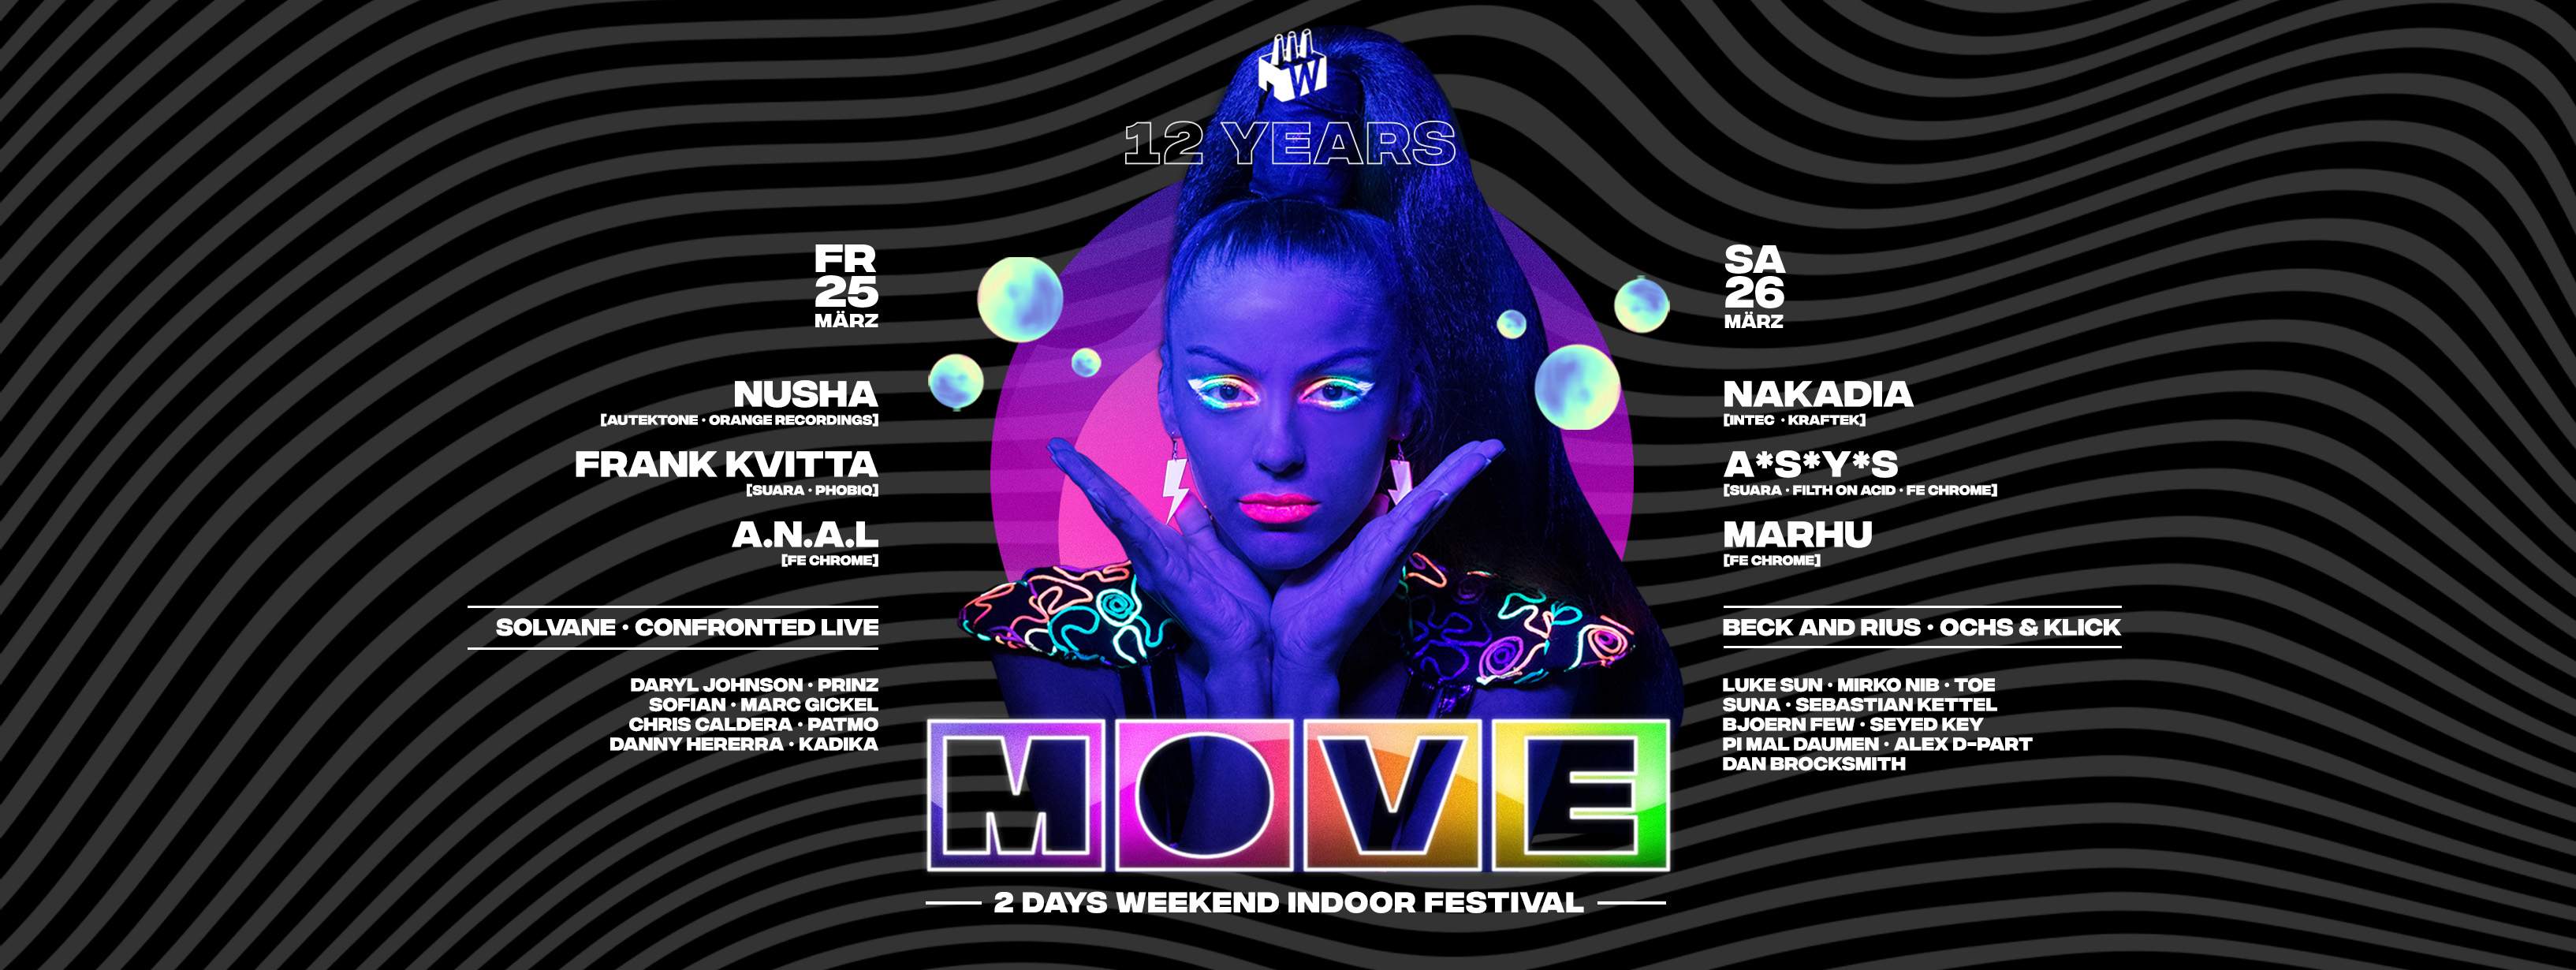 MOVE - 12 Years - 2 Days Wknd Indoor Festival - フライヤー裏